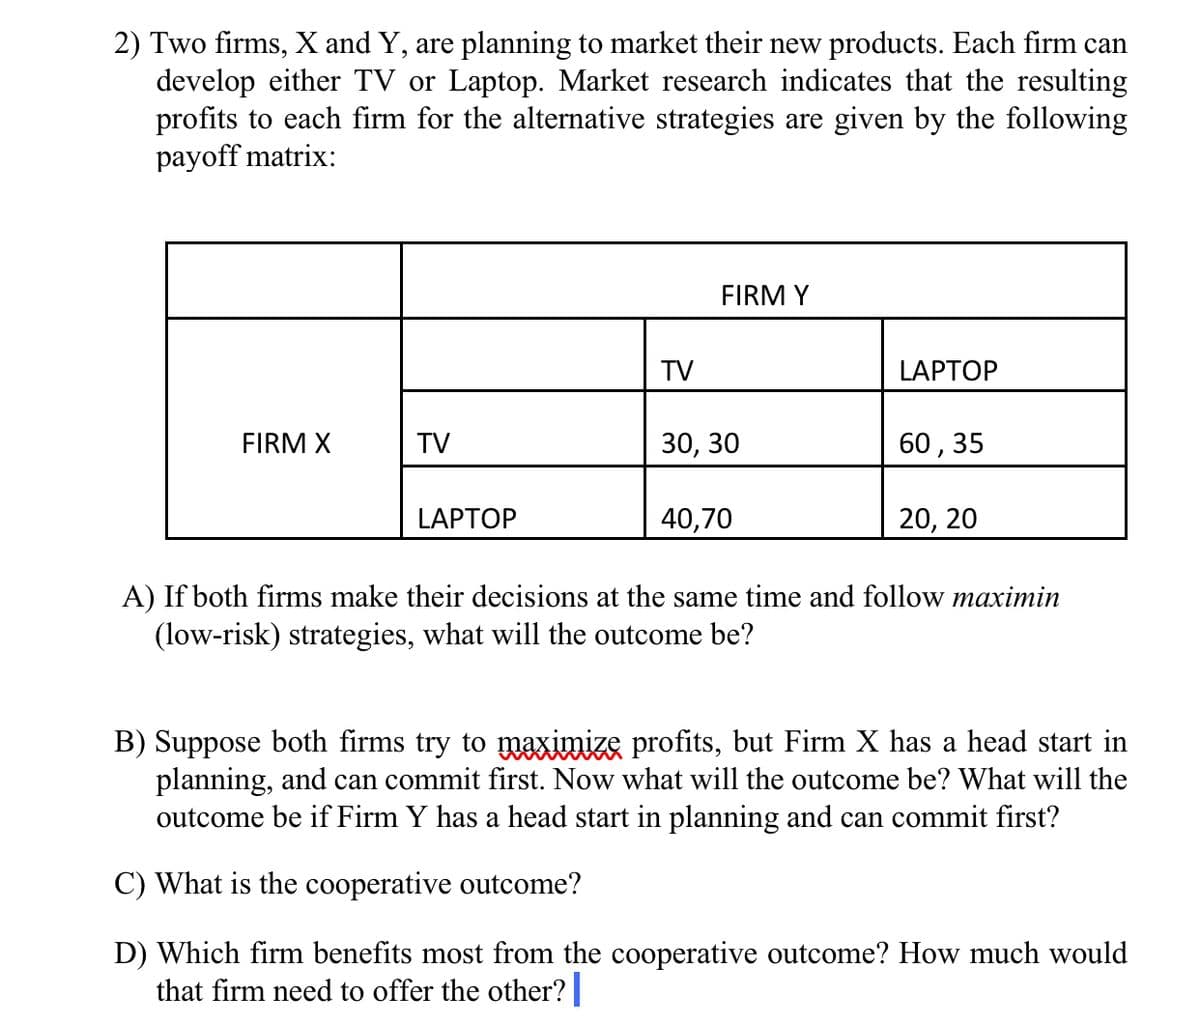 2) Two firms, X and Y, are planning to market their new products. Each firm can
develop either TV or Laptop. Market research indicates that the resulting
profits to each firm for the alternative strategies are given by the following
payoff matrix:
FIRM Y
TV
LAPTOP
FIRM X
TV
30, 30
60, 35
LAPTOP
40,70
20, 20
A) If both firms make their decisions at the same time and follow maximin
(low-risk) strategies, what will the outcome be?
B) Suppose both firms try to maximize profits, but Firm X has a head start in
planning, and can commit first. Now what will the outcome be? What will the
outcome be if Firm Y has a head start in planning and can commit first?
C) What is the cooperative outcome?
D) Which firm benefits most from the cooperative outcome? How much would
that firm need to offer the other?
